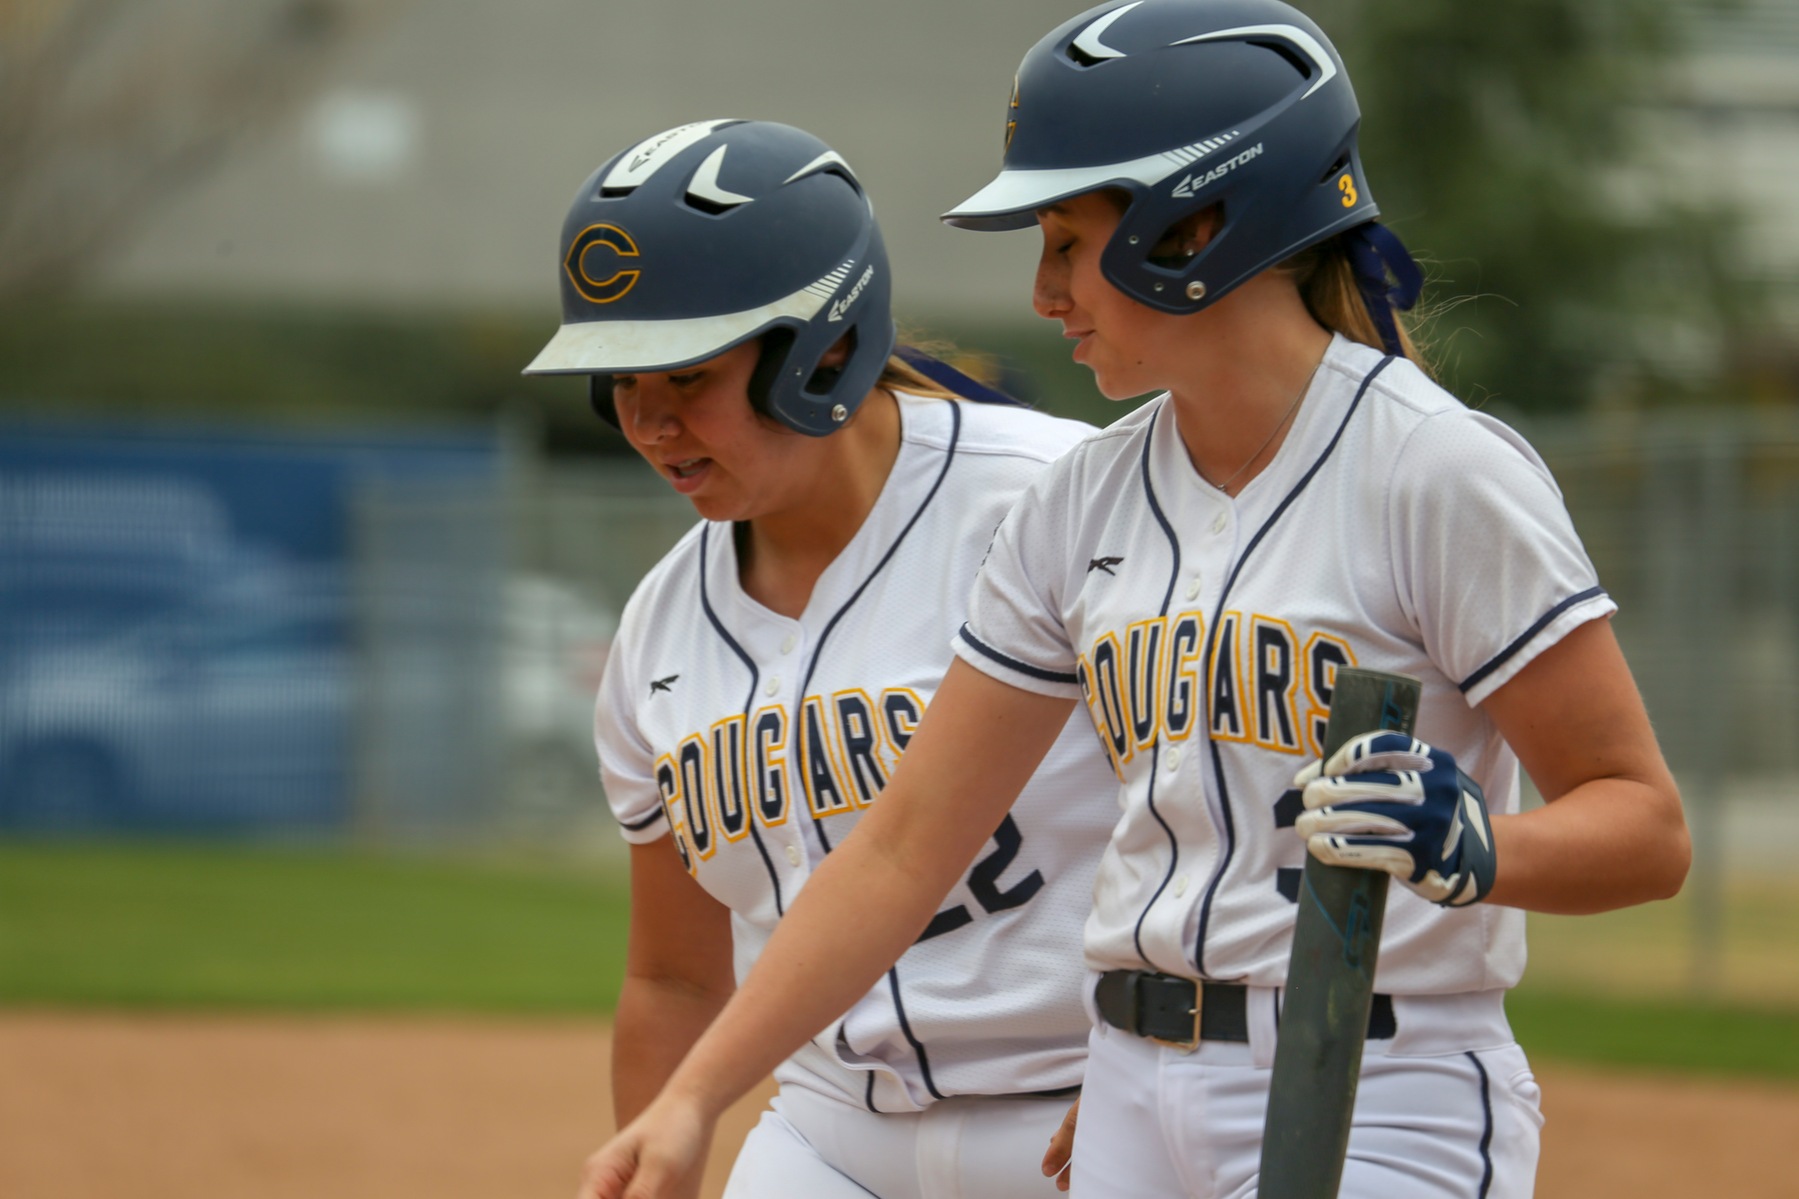 College of the Canyons softball players on Feb. 27, 2019.